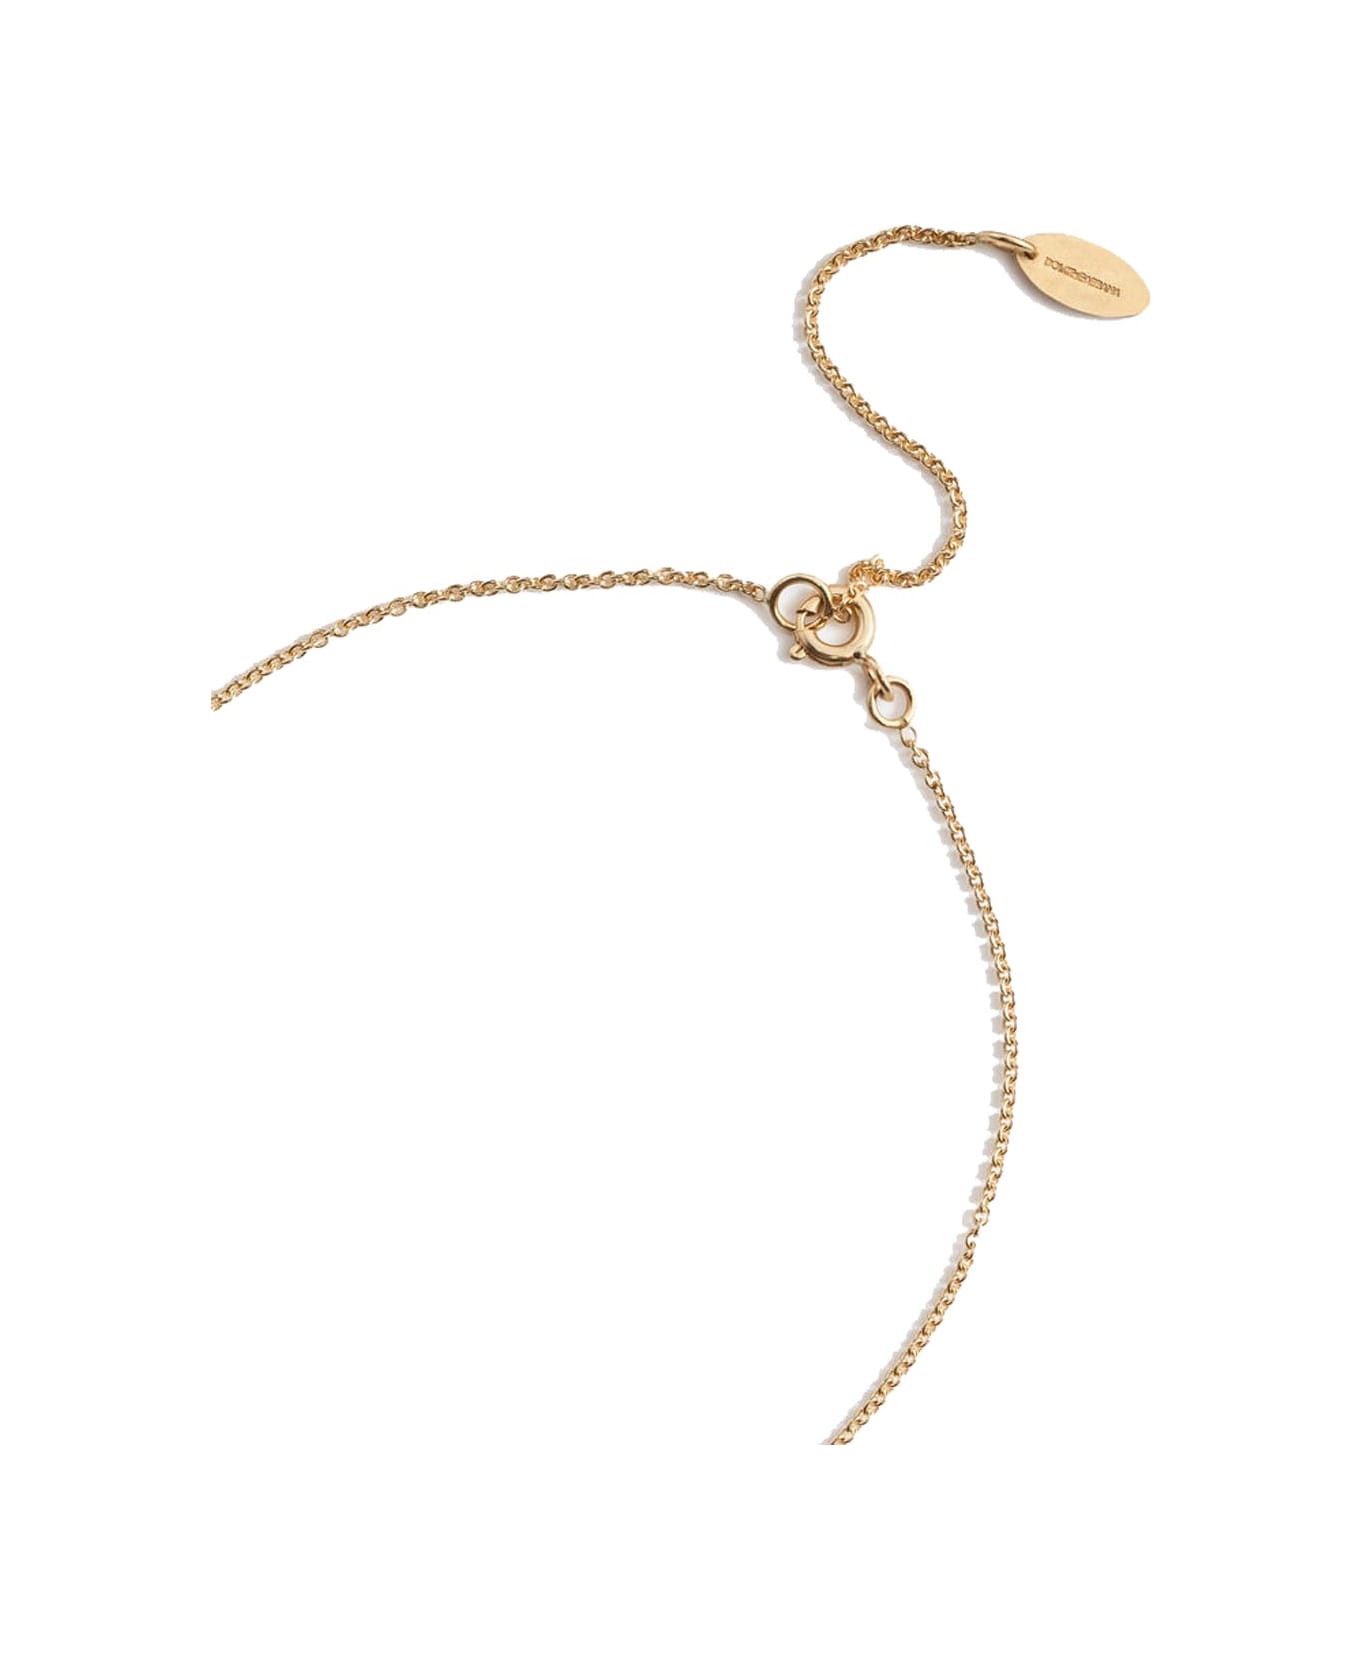 Dolce & Gabbana Necklace With Good Luck Charm - Gold